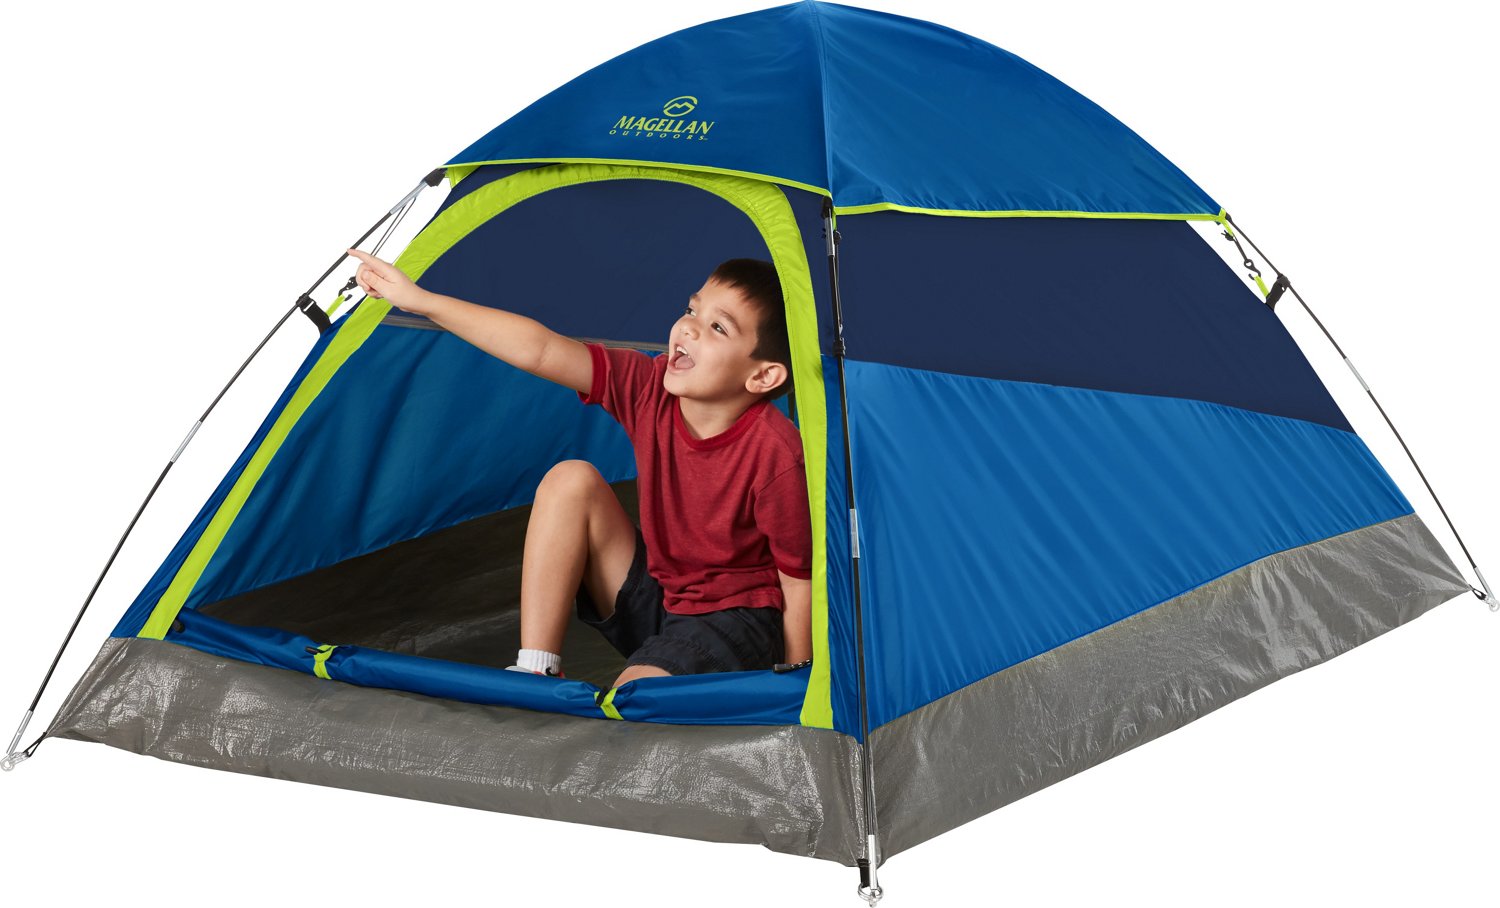 Vermindering bungeejumpen Dictatuur Magellan Outdoors Kids' 2 Person Dome Tent | Academy